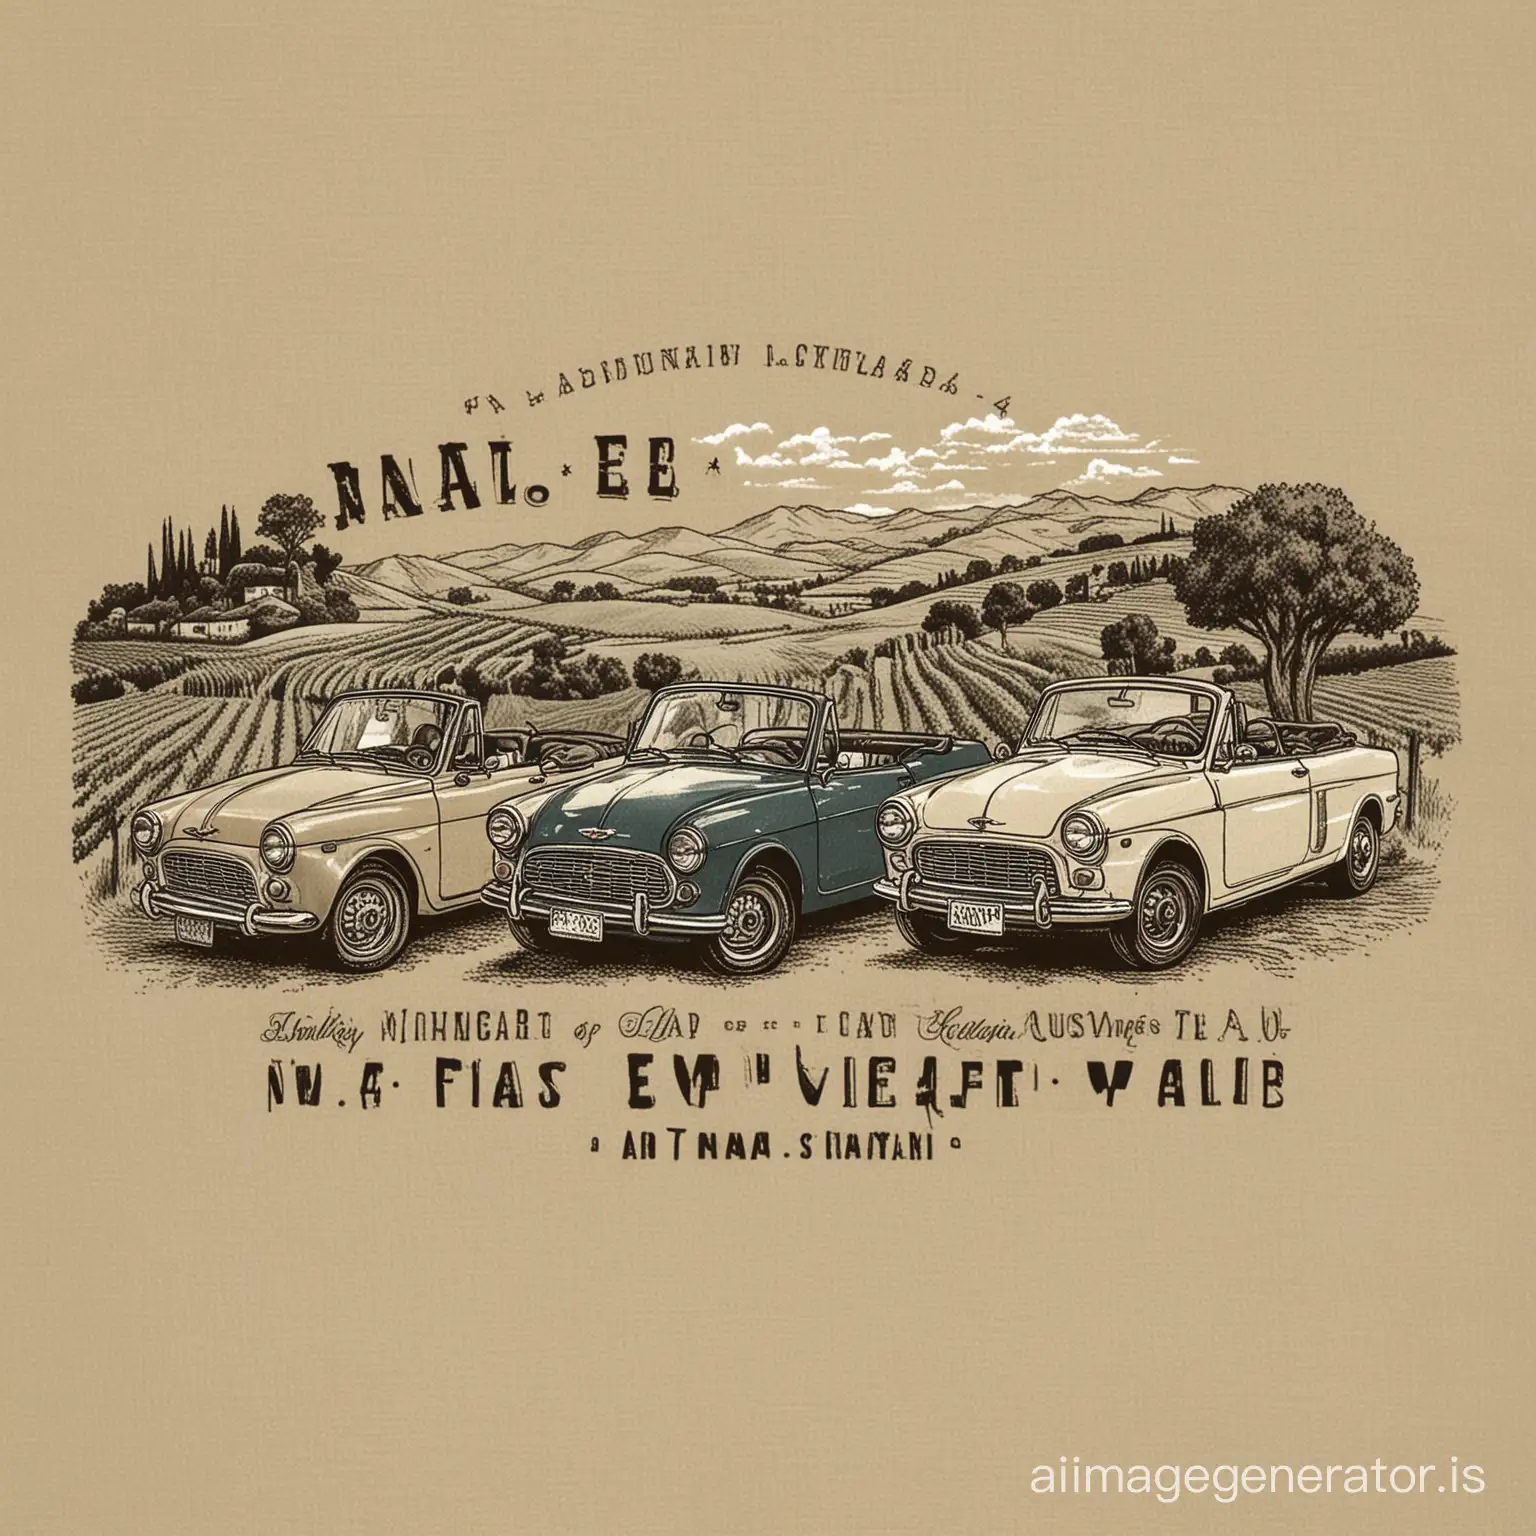 Create a T shirt design of Napa valley with four vintage fiats.  There must be no lettering on the design.